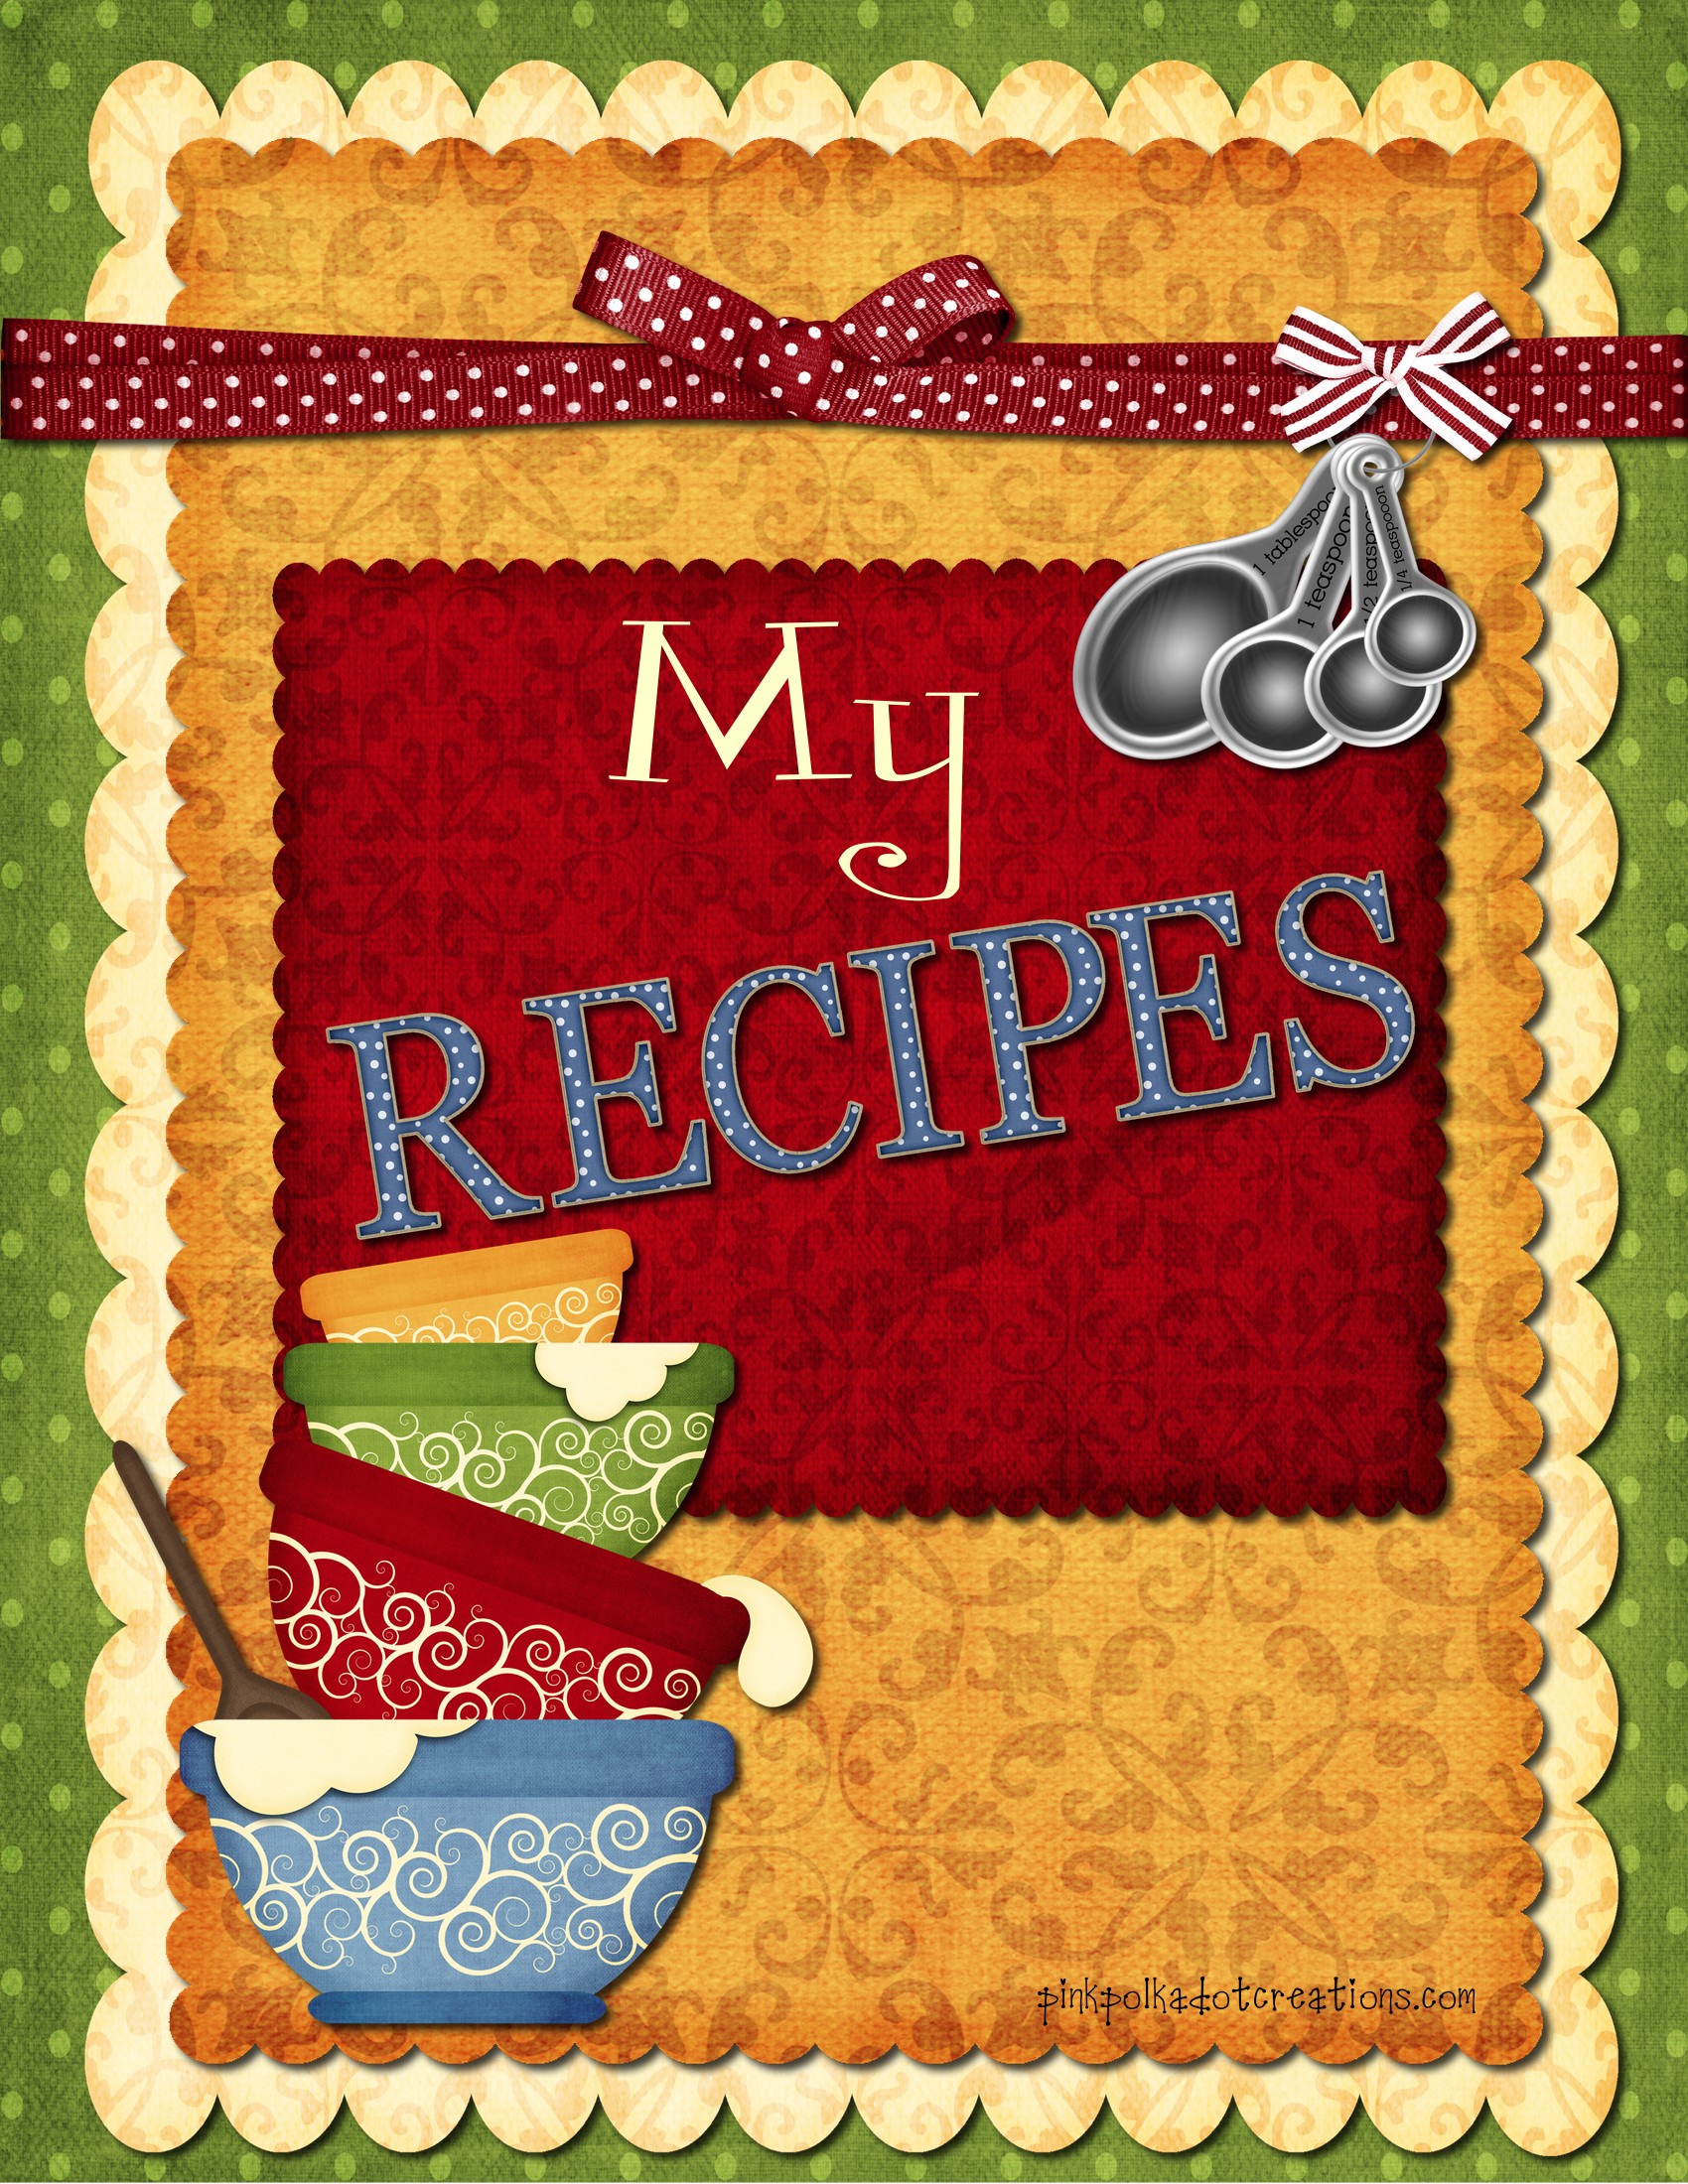 6-best-images-of-recipe-cookbook-cover-printables-printable-recipe